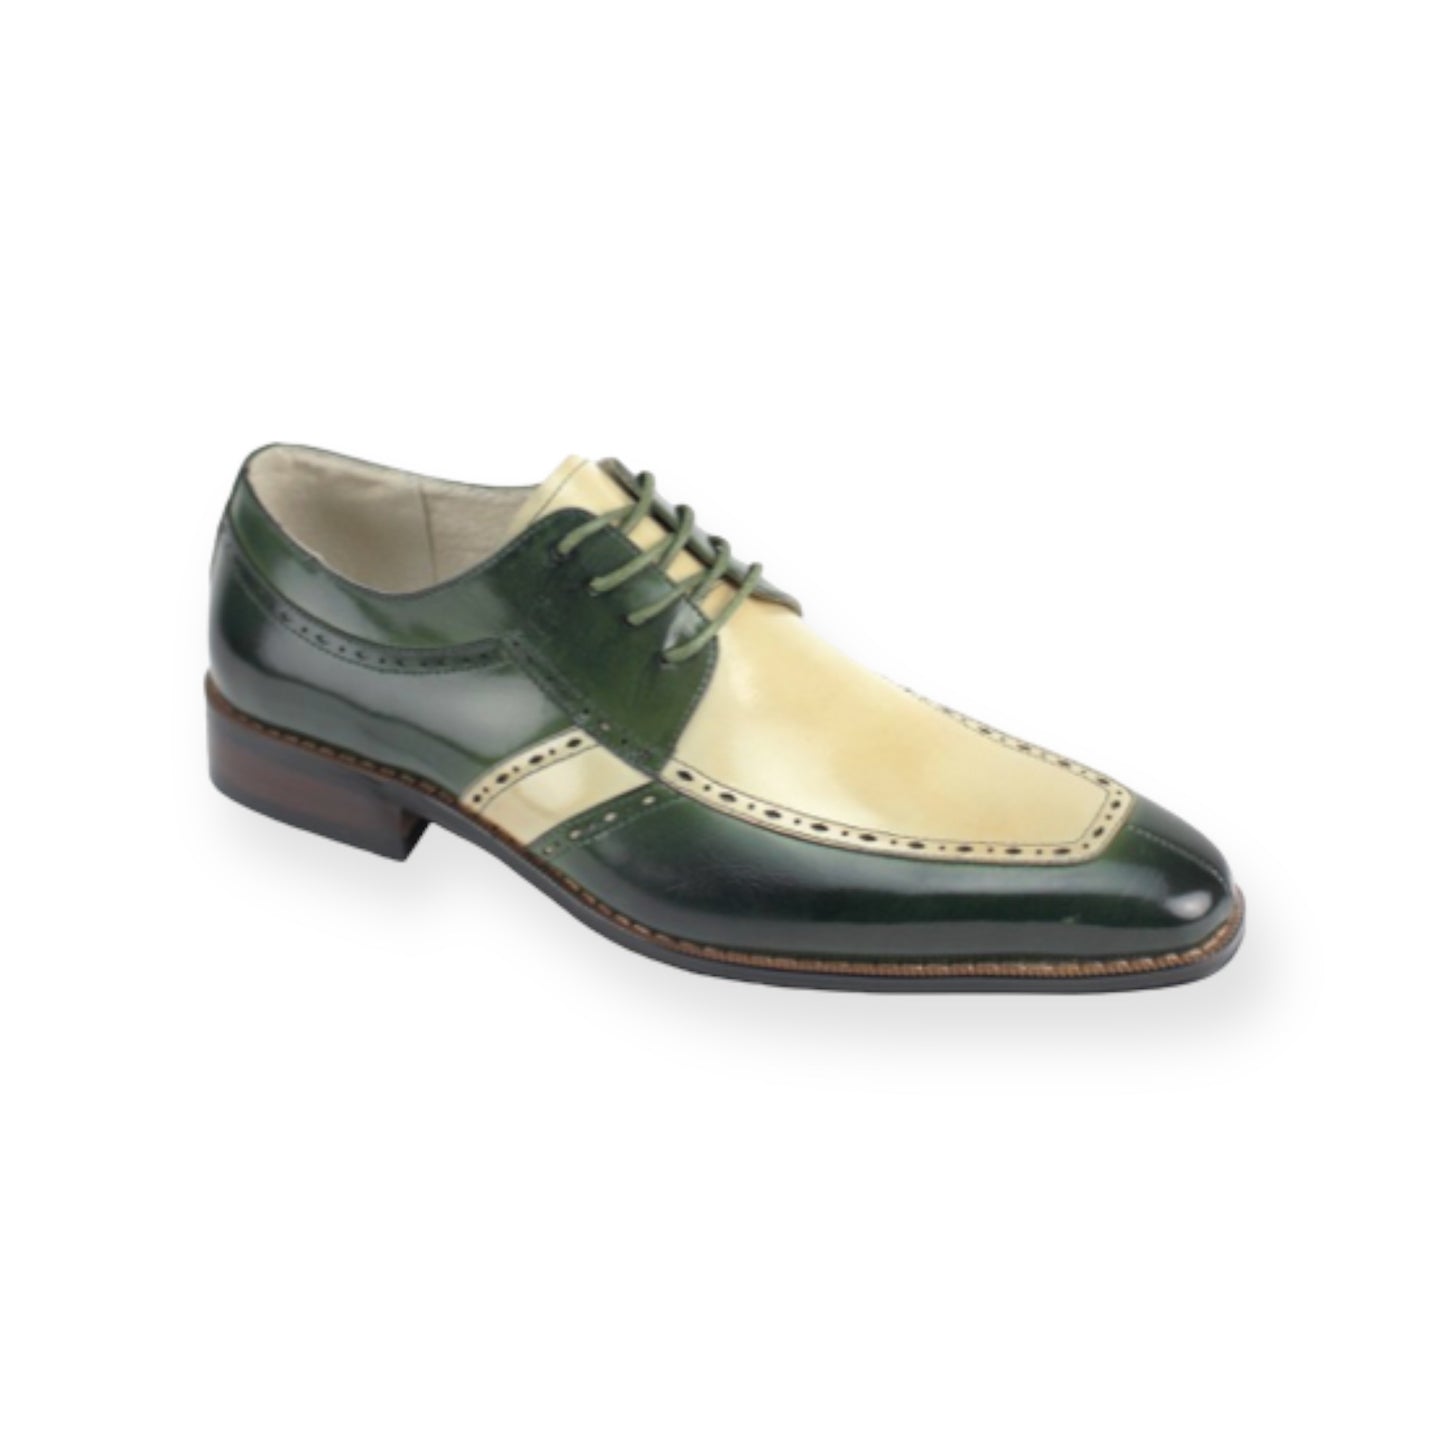 GIOVANNI: Merrick Lace Up